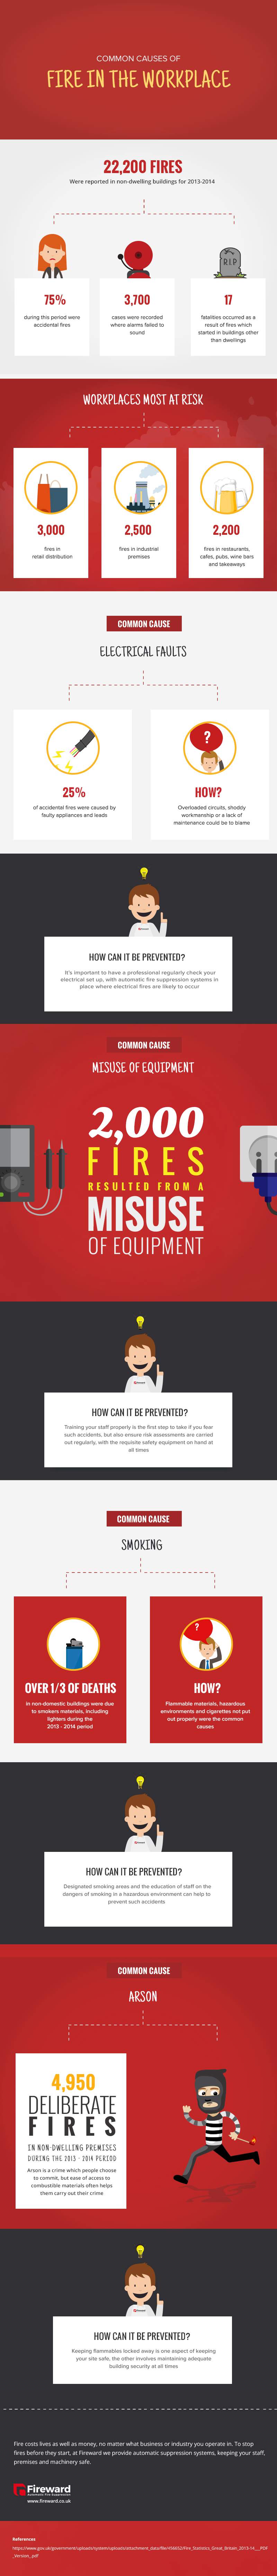 Common-causes-of-fire-in-the-workplace